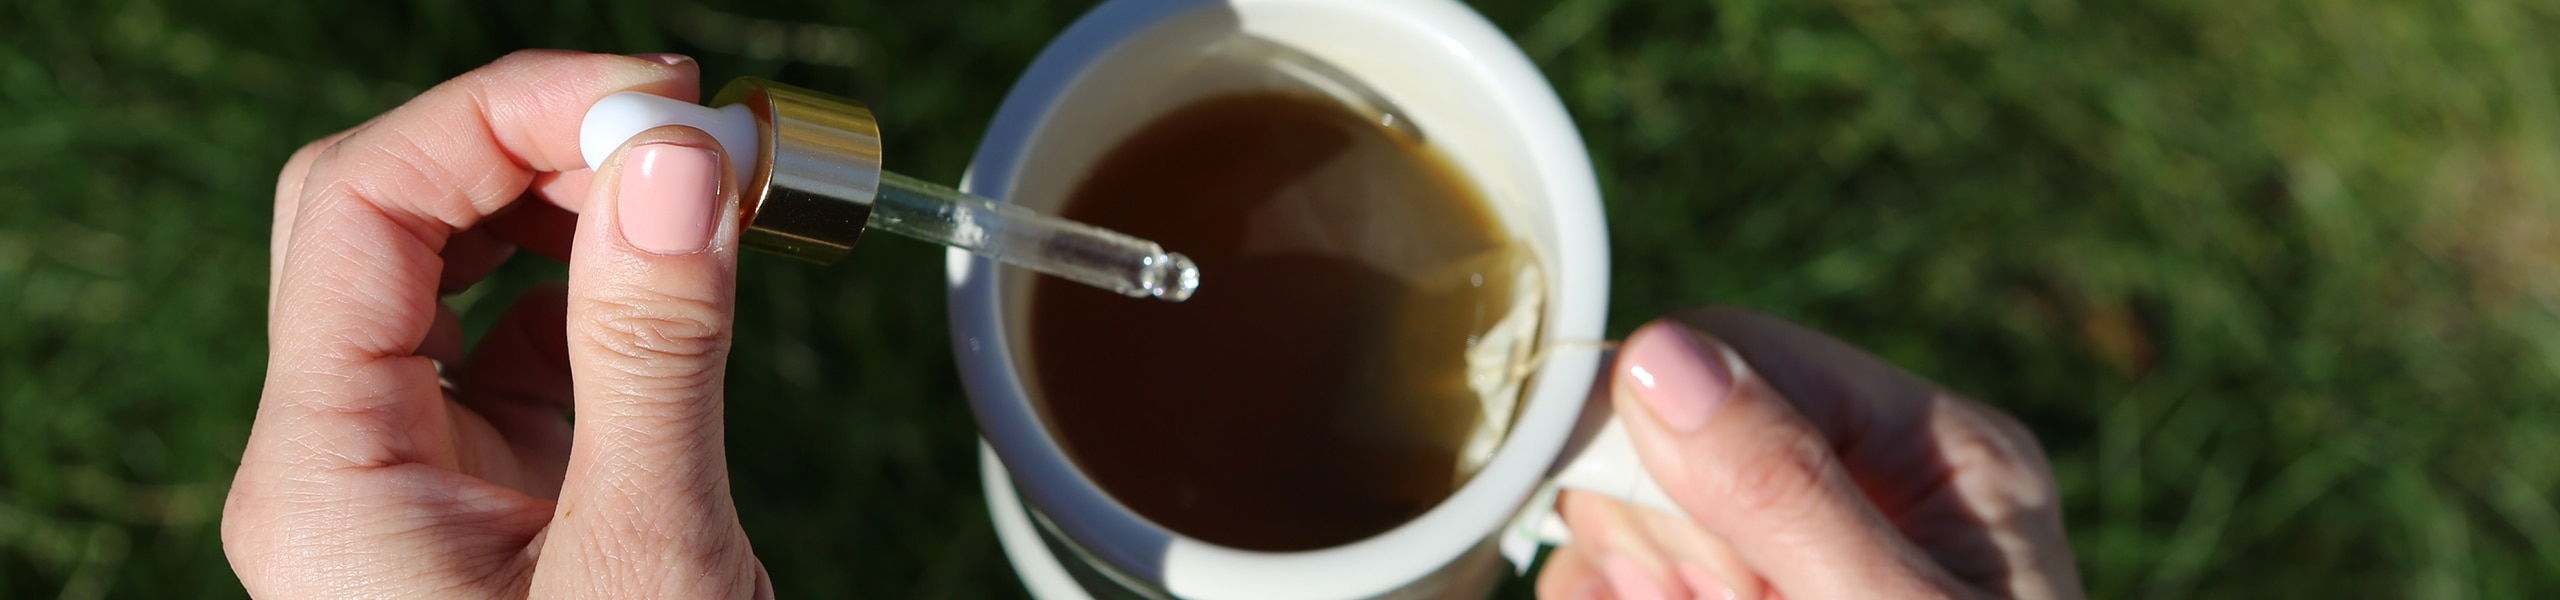 Person squirting CBD oil into a cup of tea